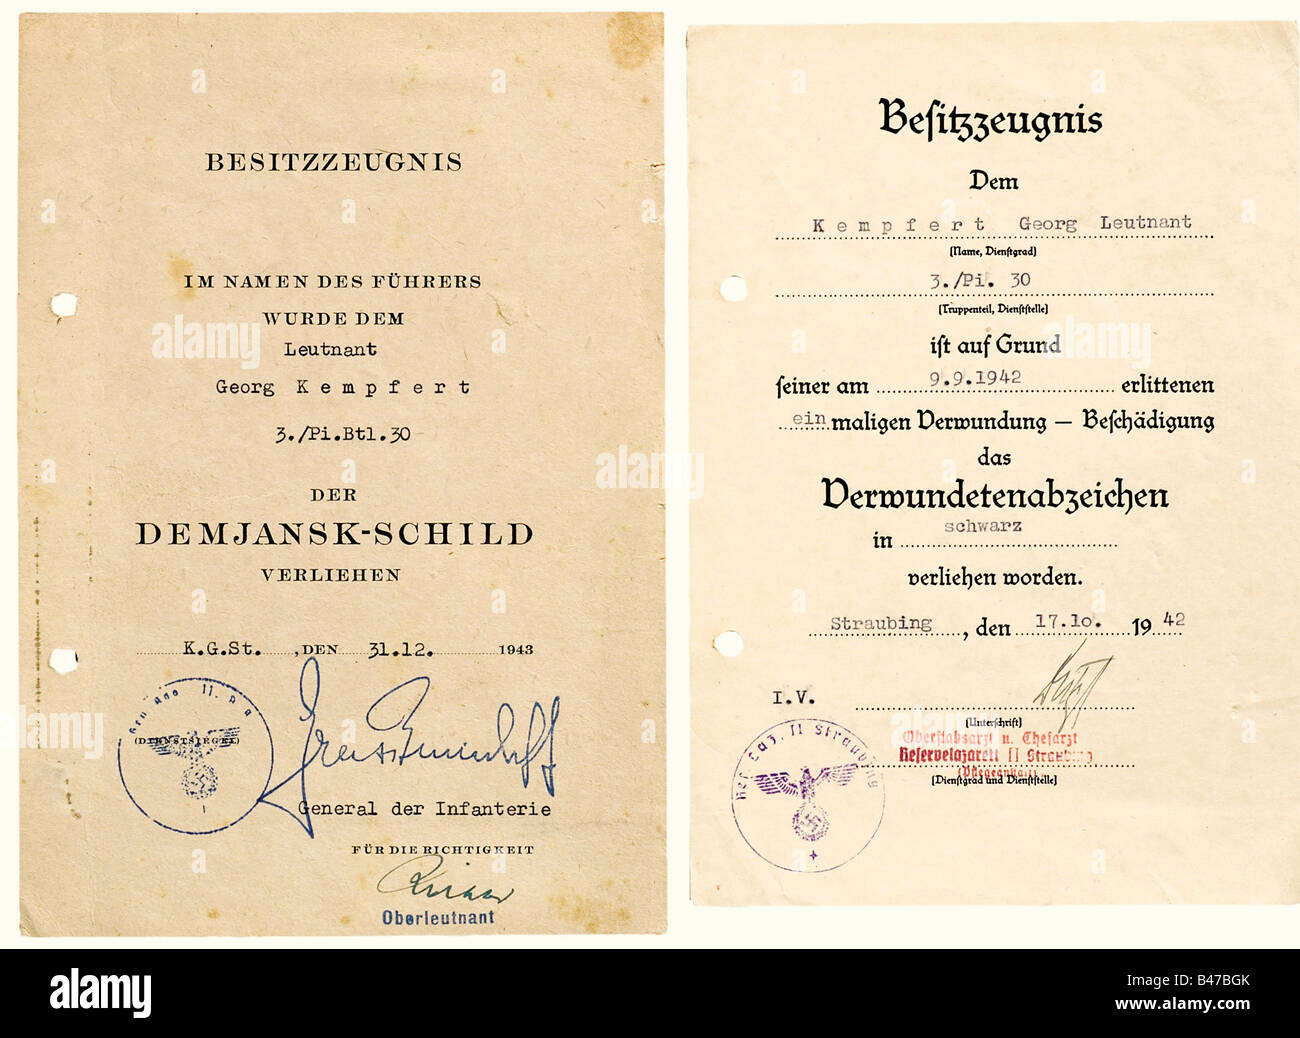 Georg Kempfert, Lieutenant in Pioneer Battalions 30 and 743, award documents and possession certificates Award documents for the Iron Cross of 1939 2nd and 1st Classes, dated 25 May 1940 (original pencil signature v. Briesen) and 17 January 1942 (original signature v. Tippelskirch) respectively, typed possession certificates for the General Assault Badge 1 December 1941 with original signature v. Tippelskirch in coloured pencil and Close Combat Clasp 1st Class 22 September 1943, document for the Eastern Front Medal 26 July 1943, possession certificates for the , Stock Photo